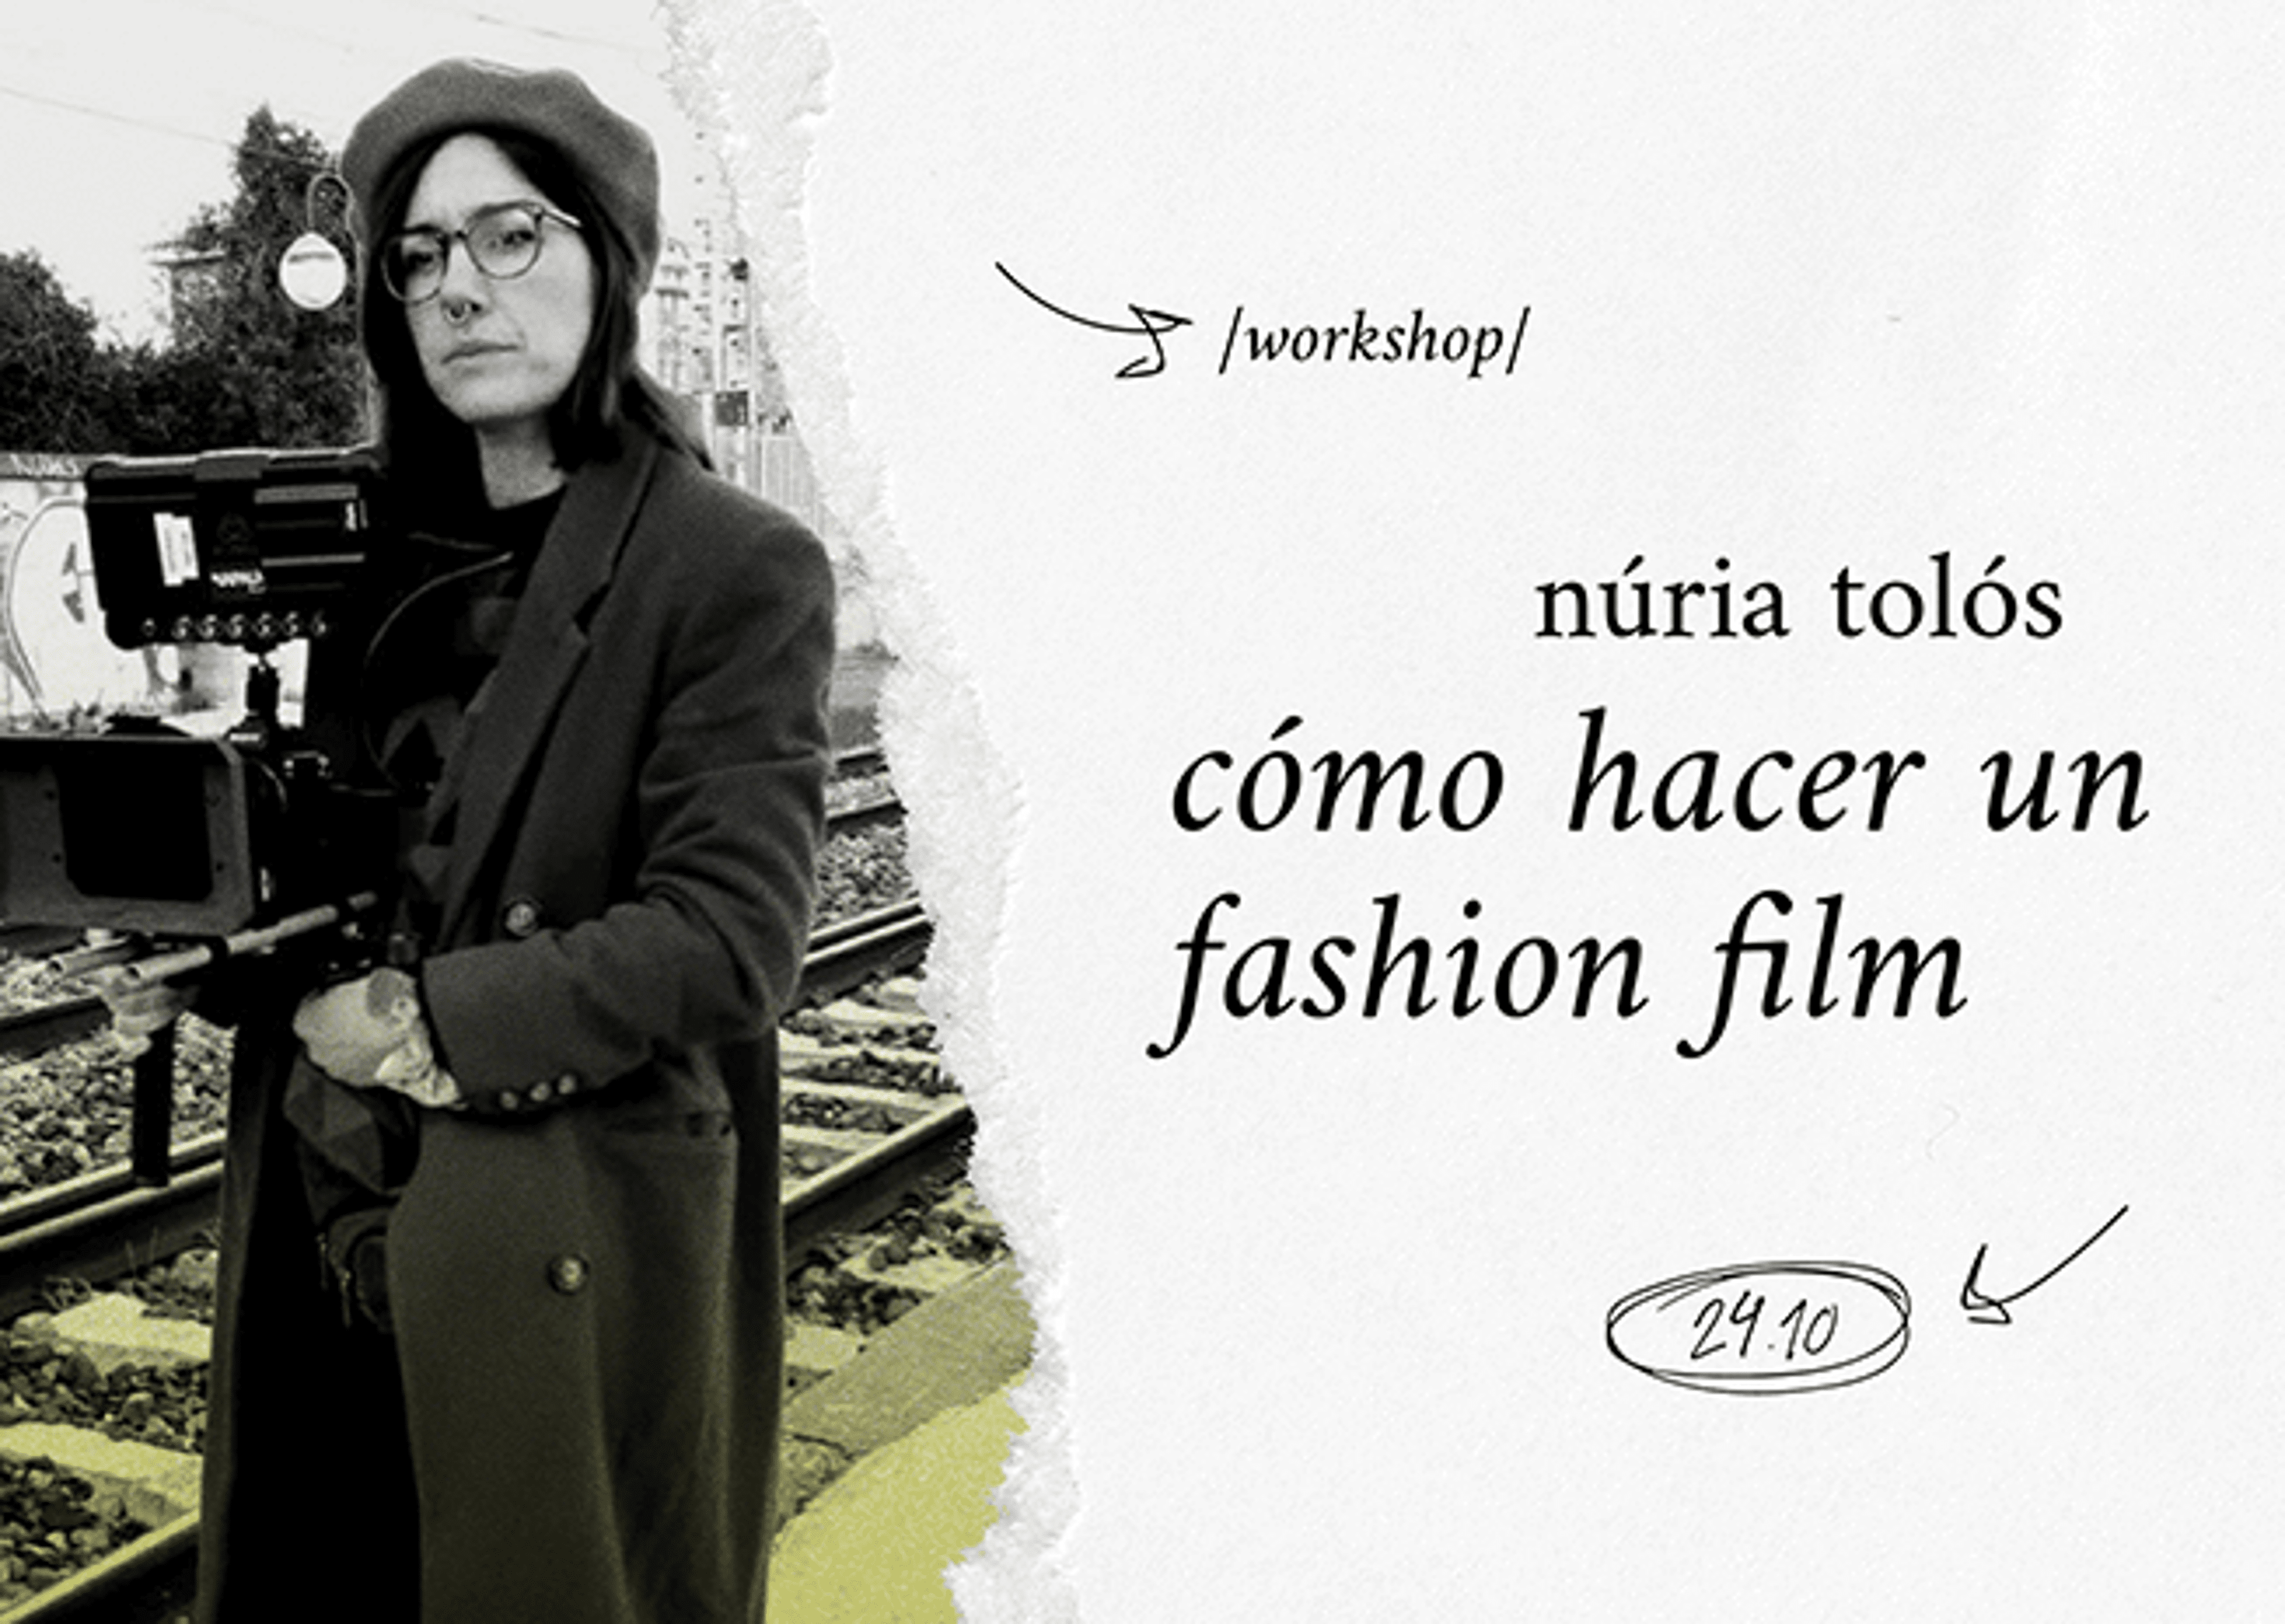 Promotional image for a workshop titled 'How to make a fashion film' featuring Núria Tolós, scheduled for October 24th.